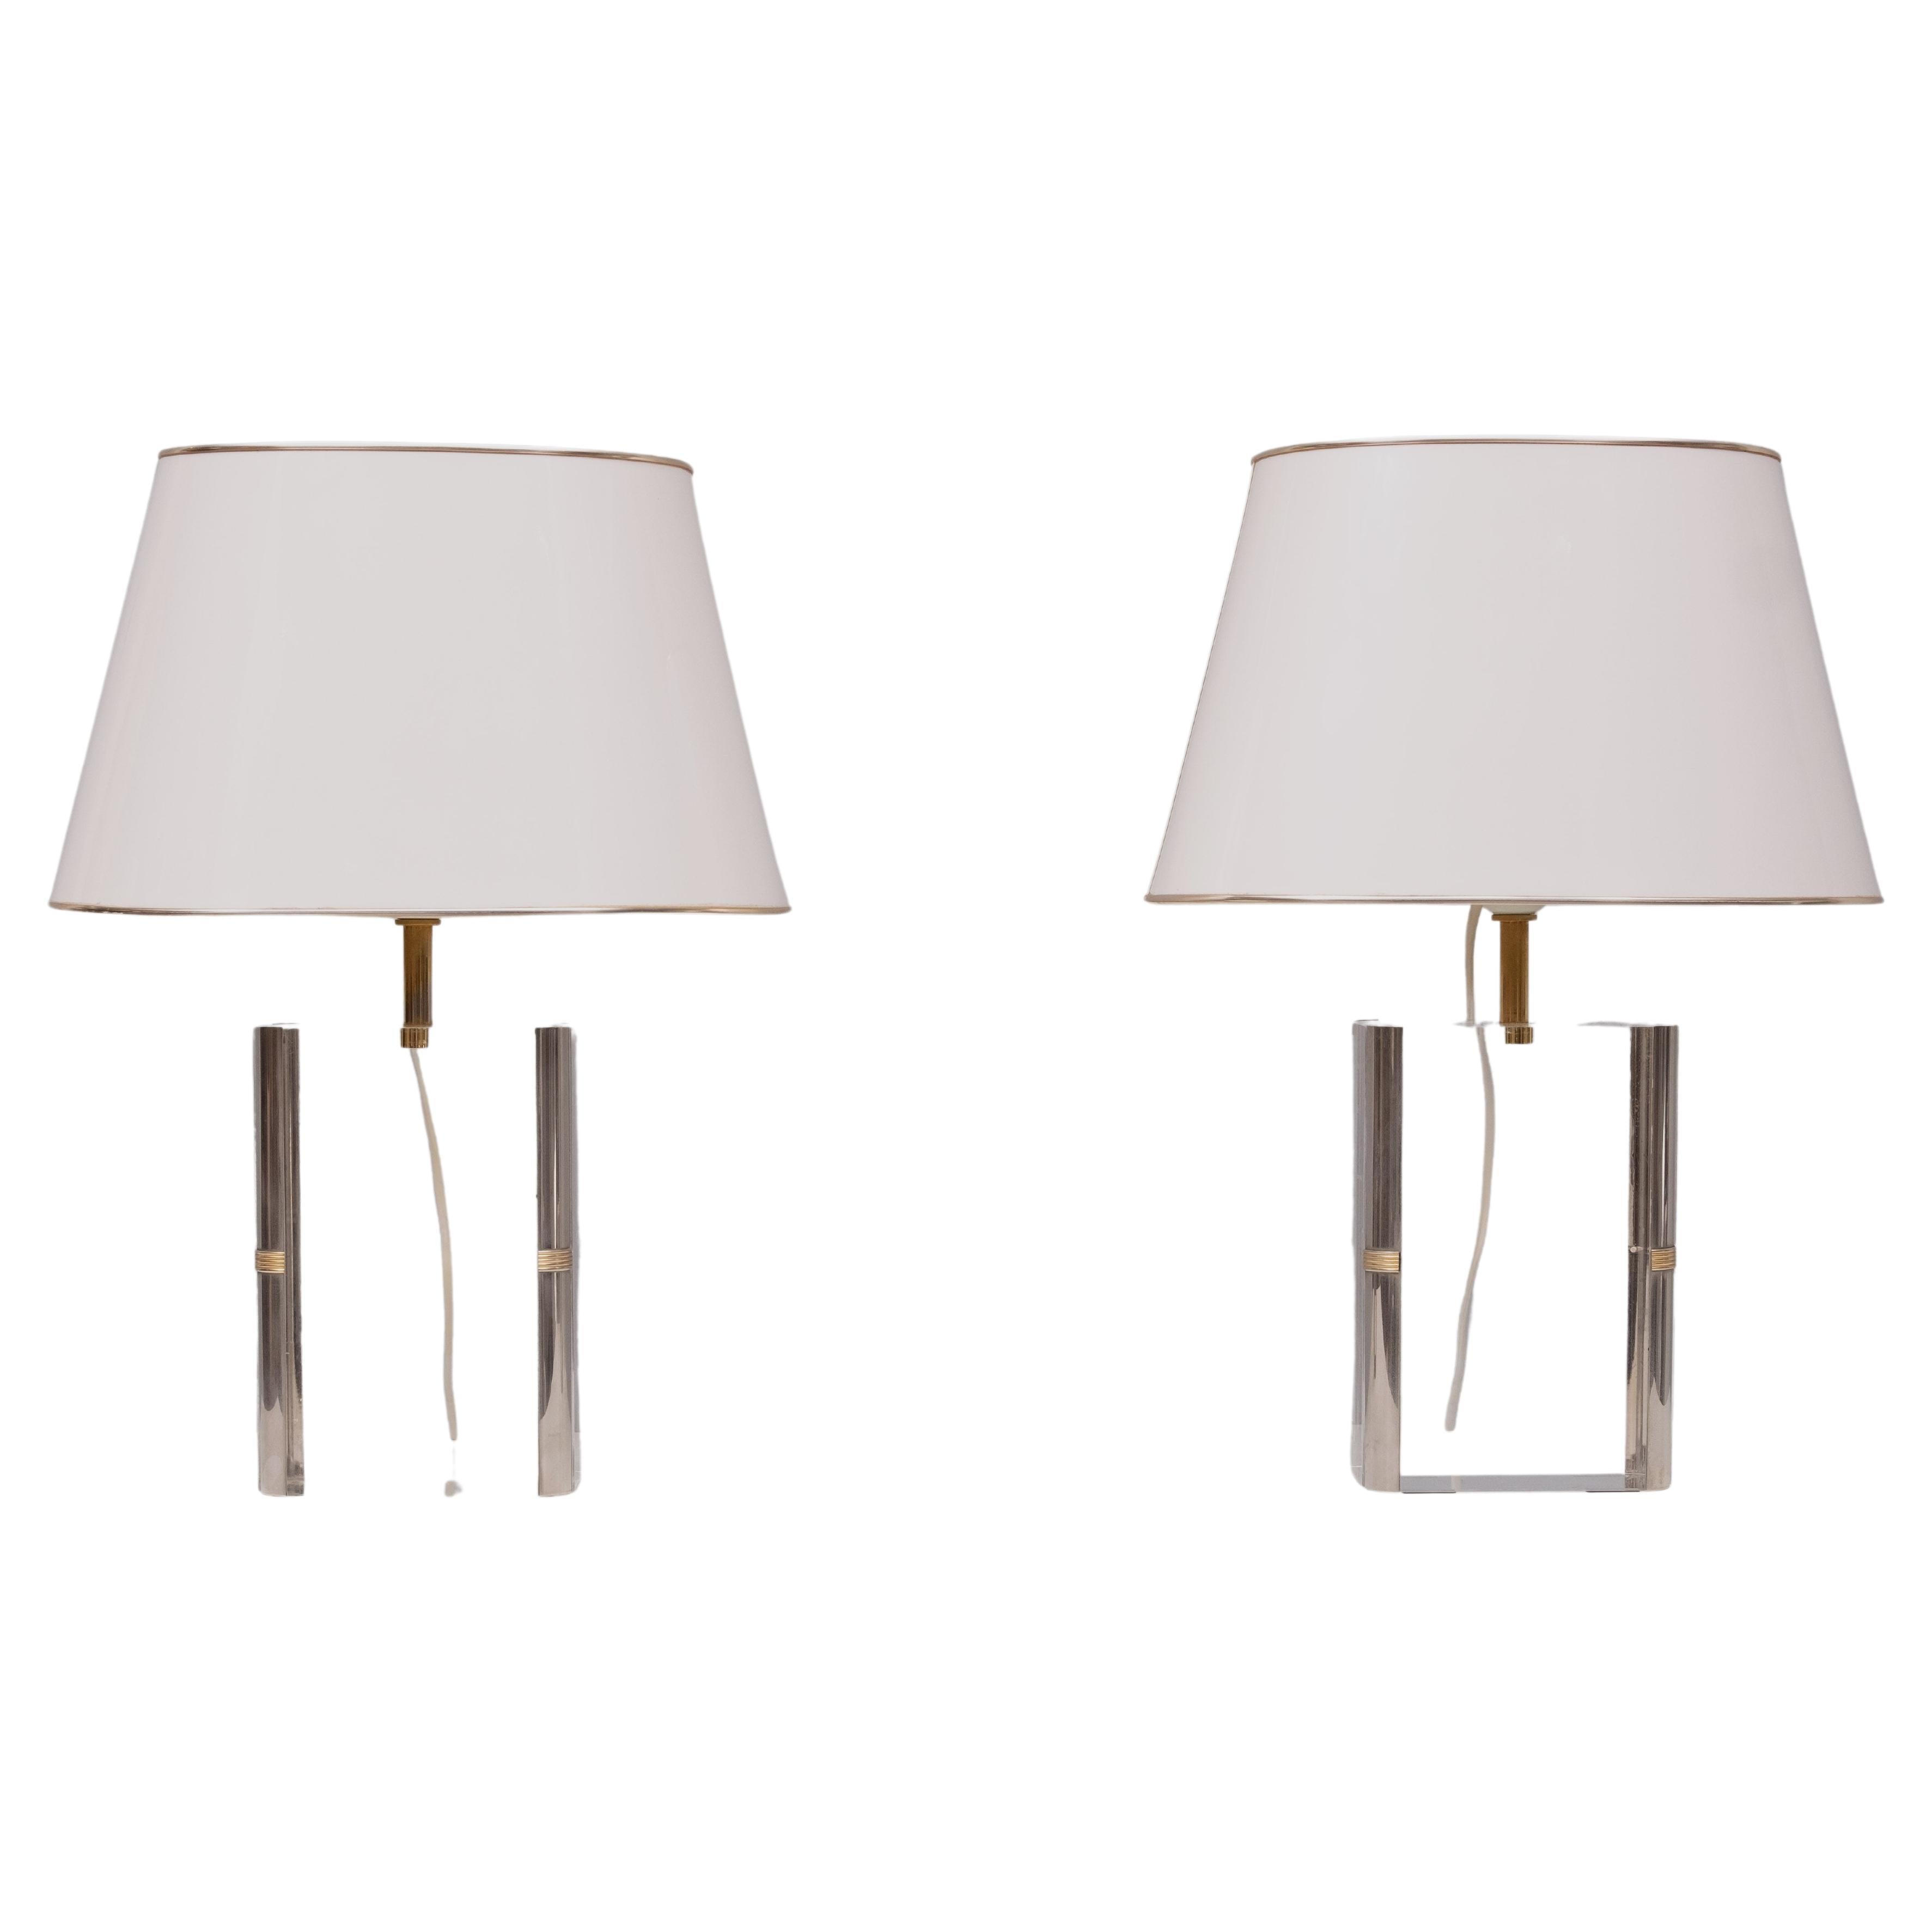 Very nice set of table lamps . Solid Lucite base ,comes with 
Polished Aluminum corners pieces ,with Brass details . good quality lamps.
Complete with there original White High Gloss shades .
Oval shaped.  Really stunning lamps . Good condition